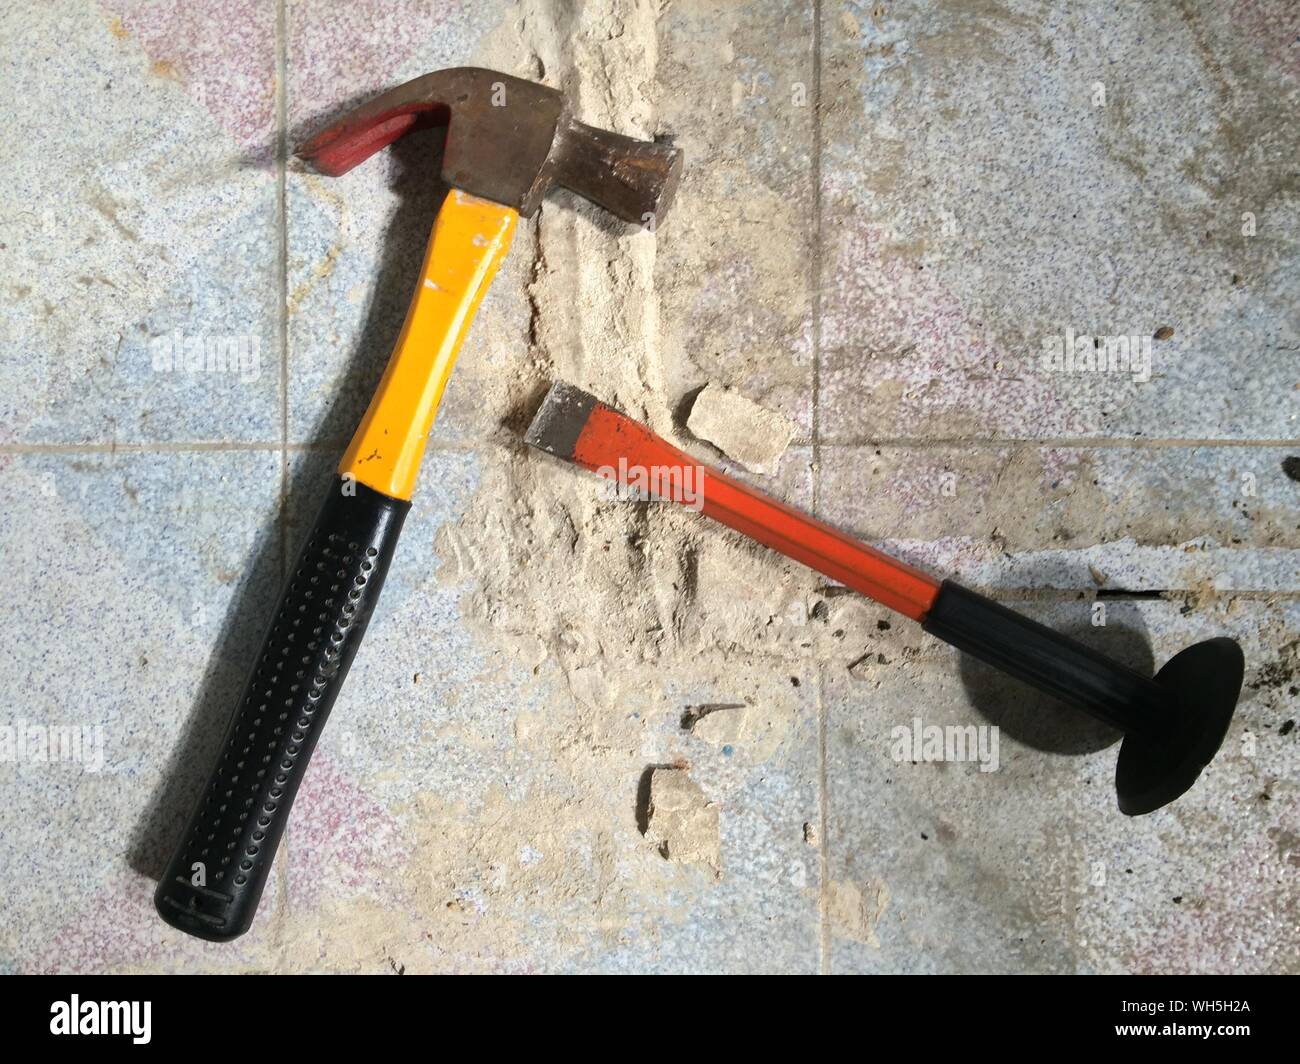 Hammer With Chisel On Tiled Floor Stock Photo